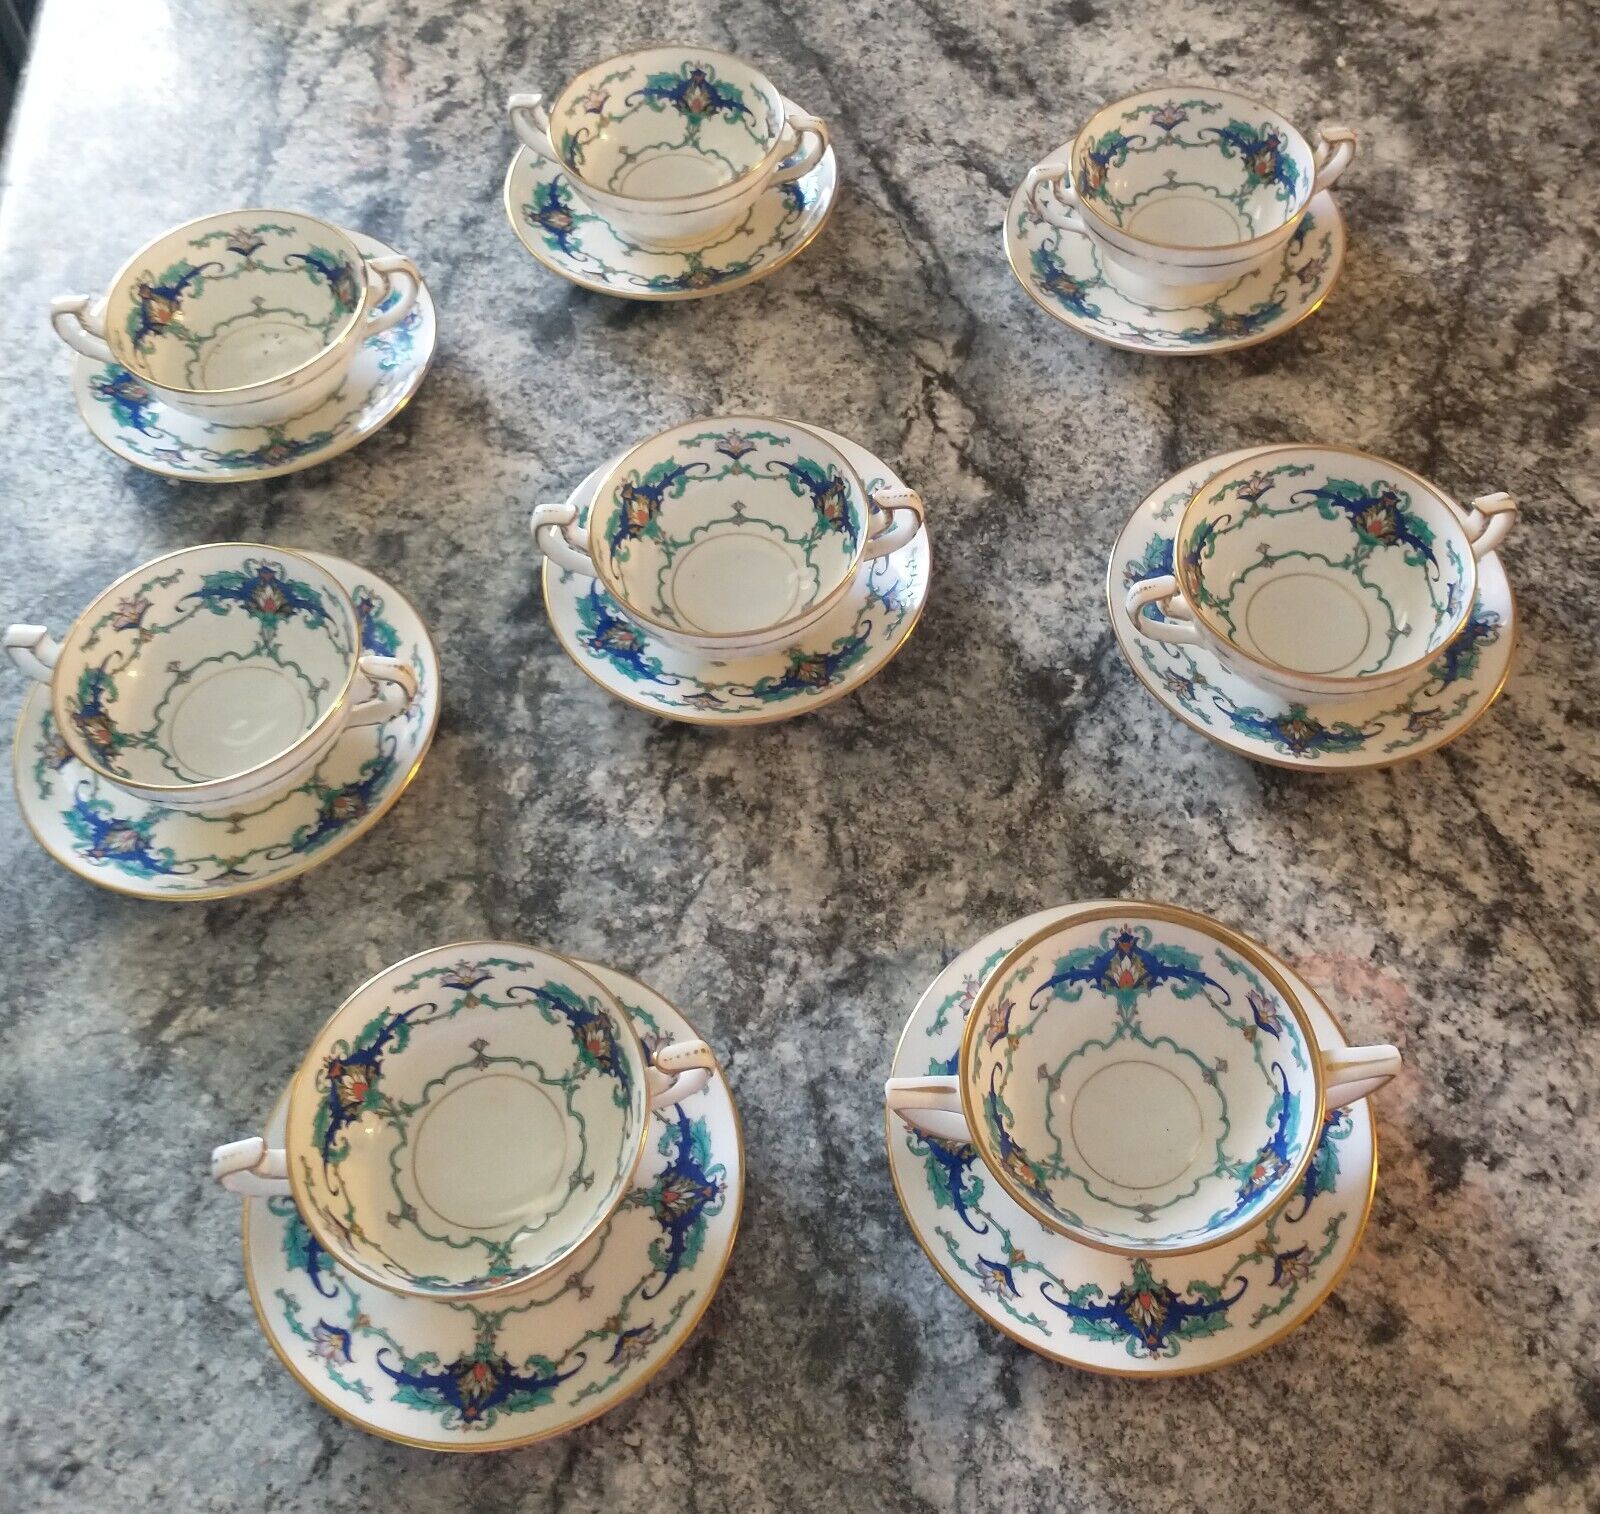 Set Of Eight Minton\'s Bullion Cups & Saucers From 1918 # H2953. Read